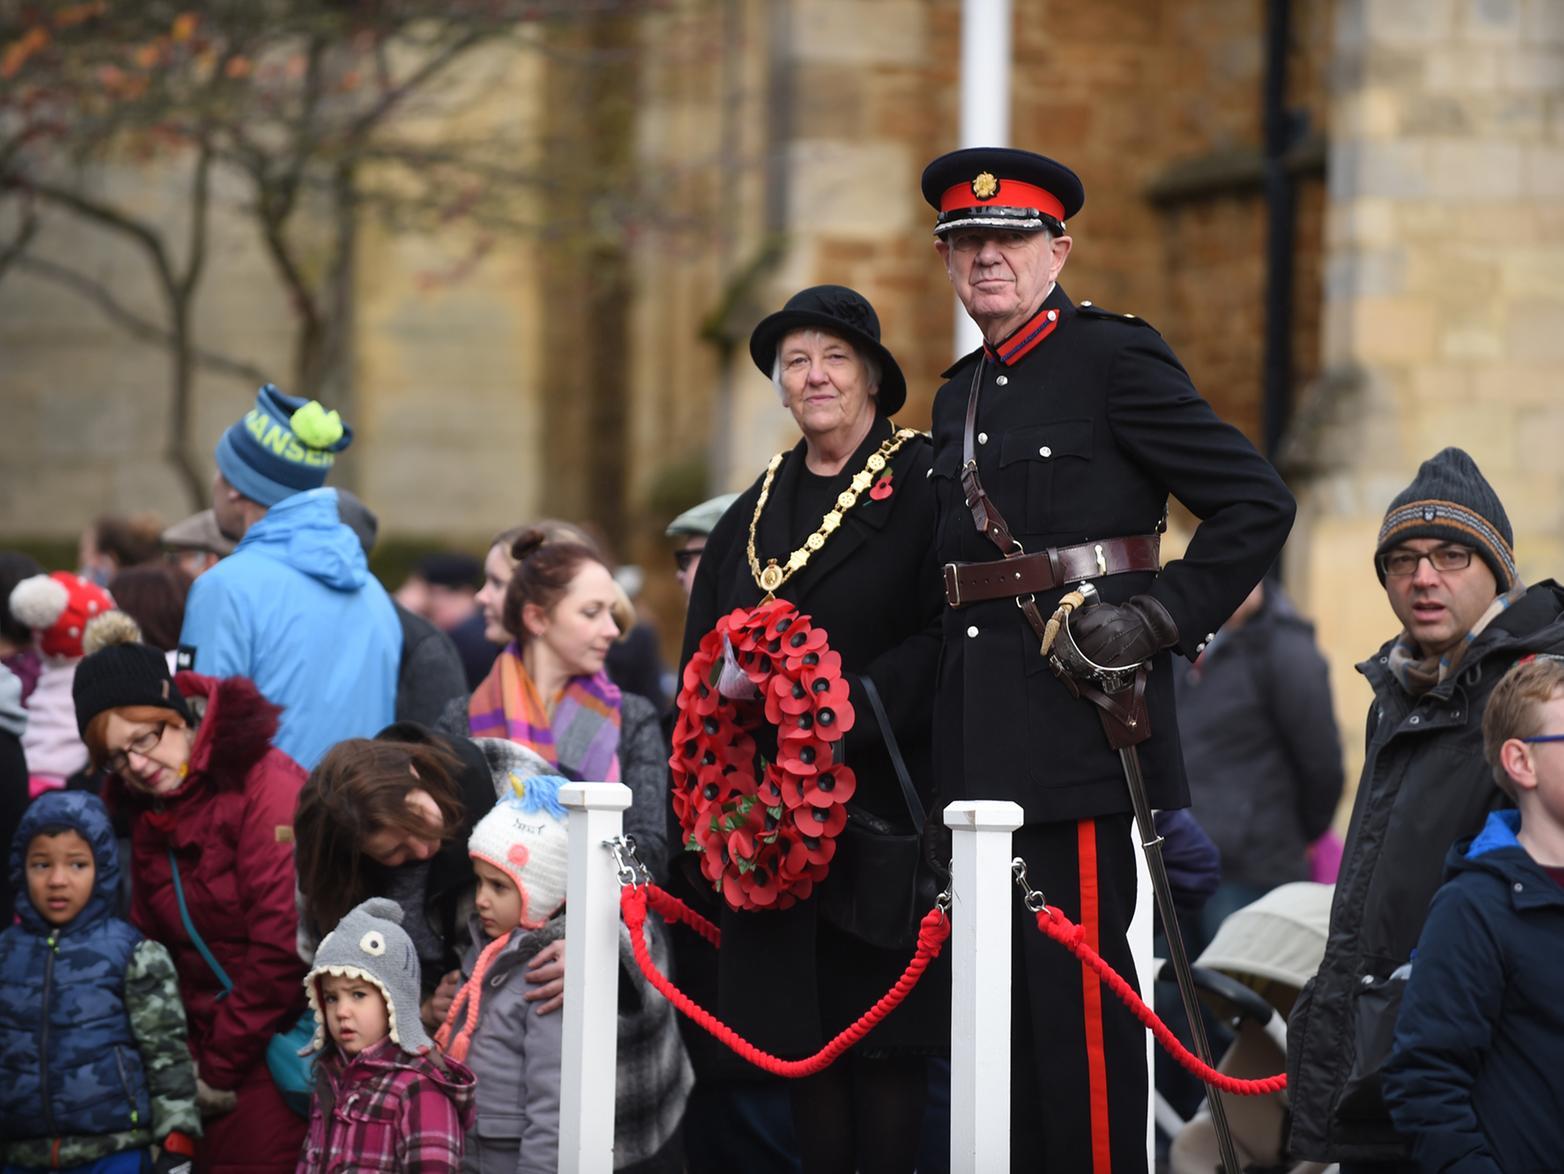 Chairman Barbara Johnson and Andrew Granger Deputy Lord Lieutenant of Leicestershire on the get ready for the remembrance parade.